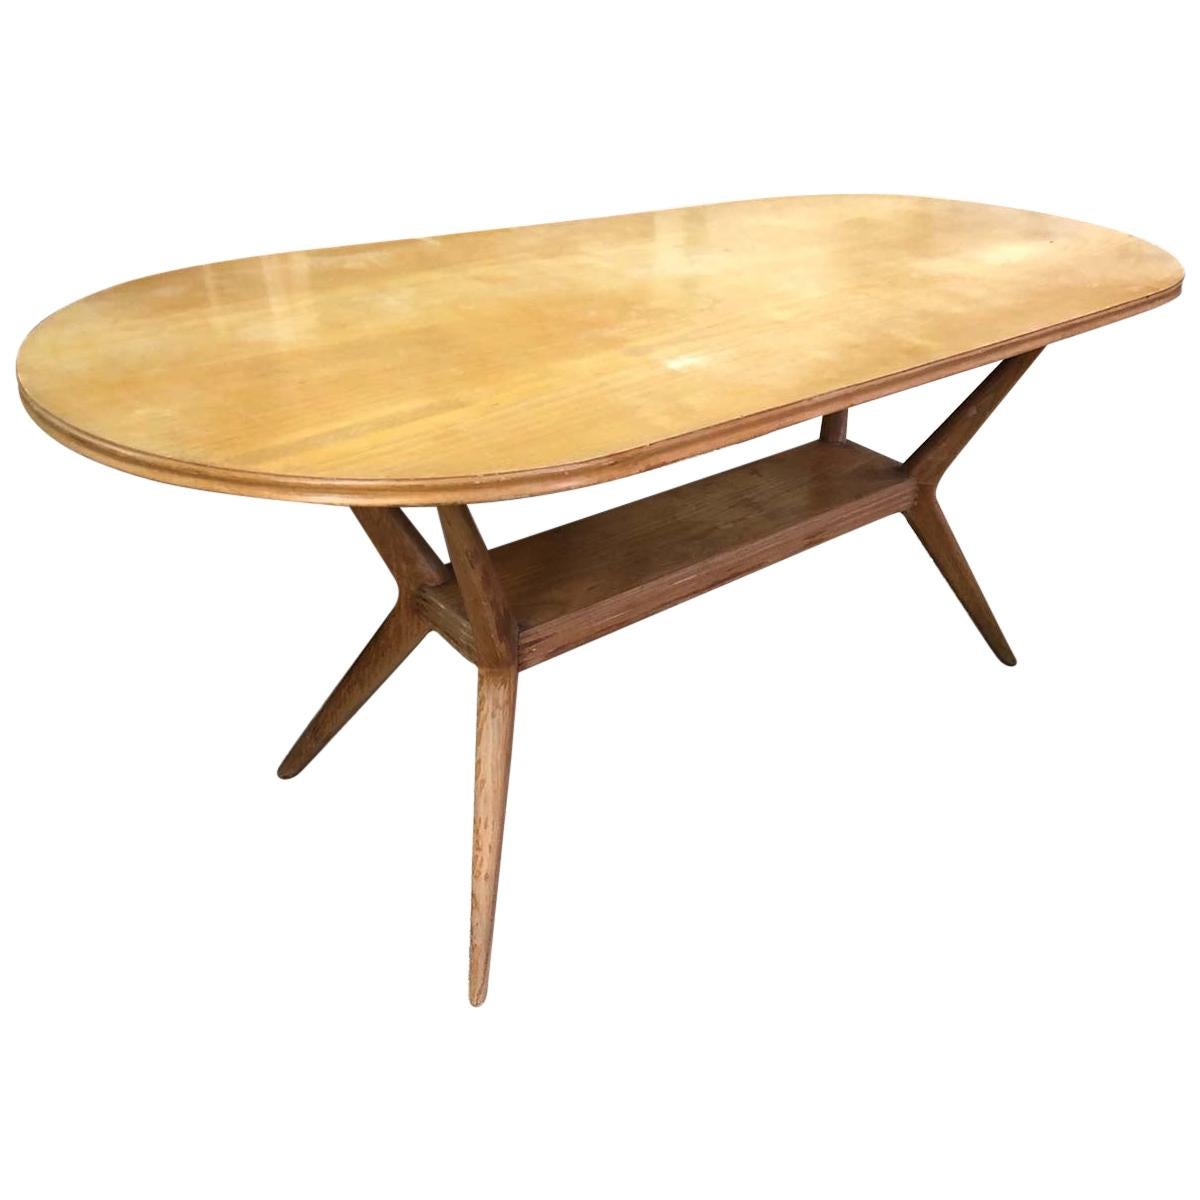 Italian Design Table Chestnut from the 1960s Restored Wax Polished from Tuscany